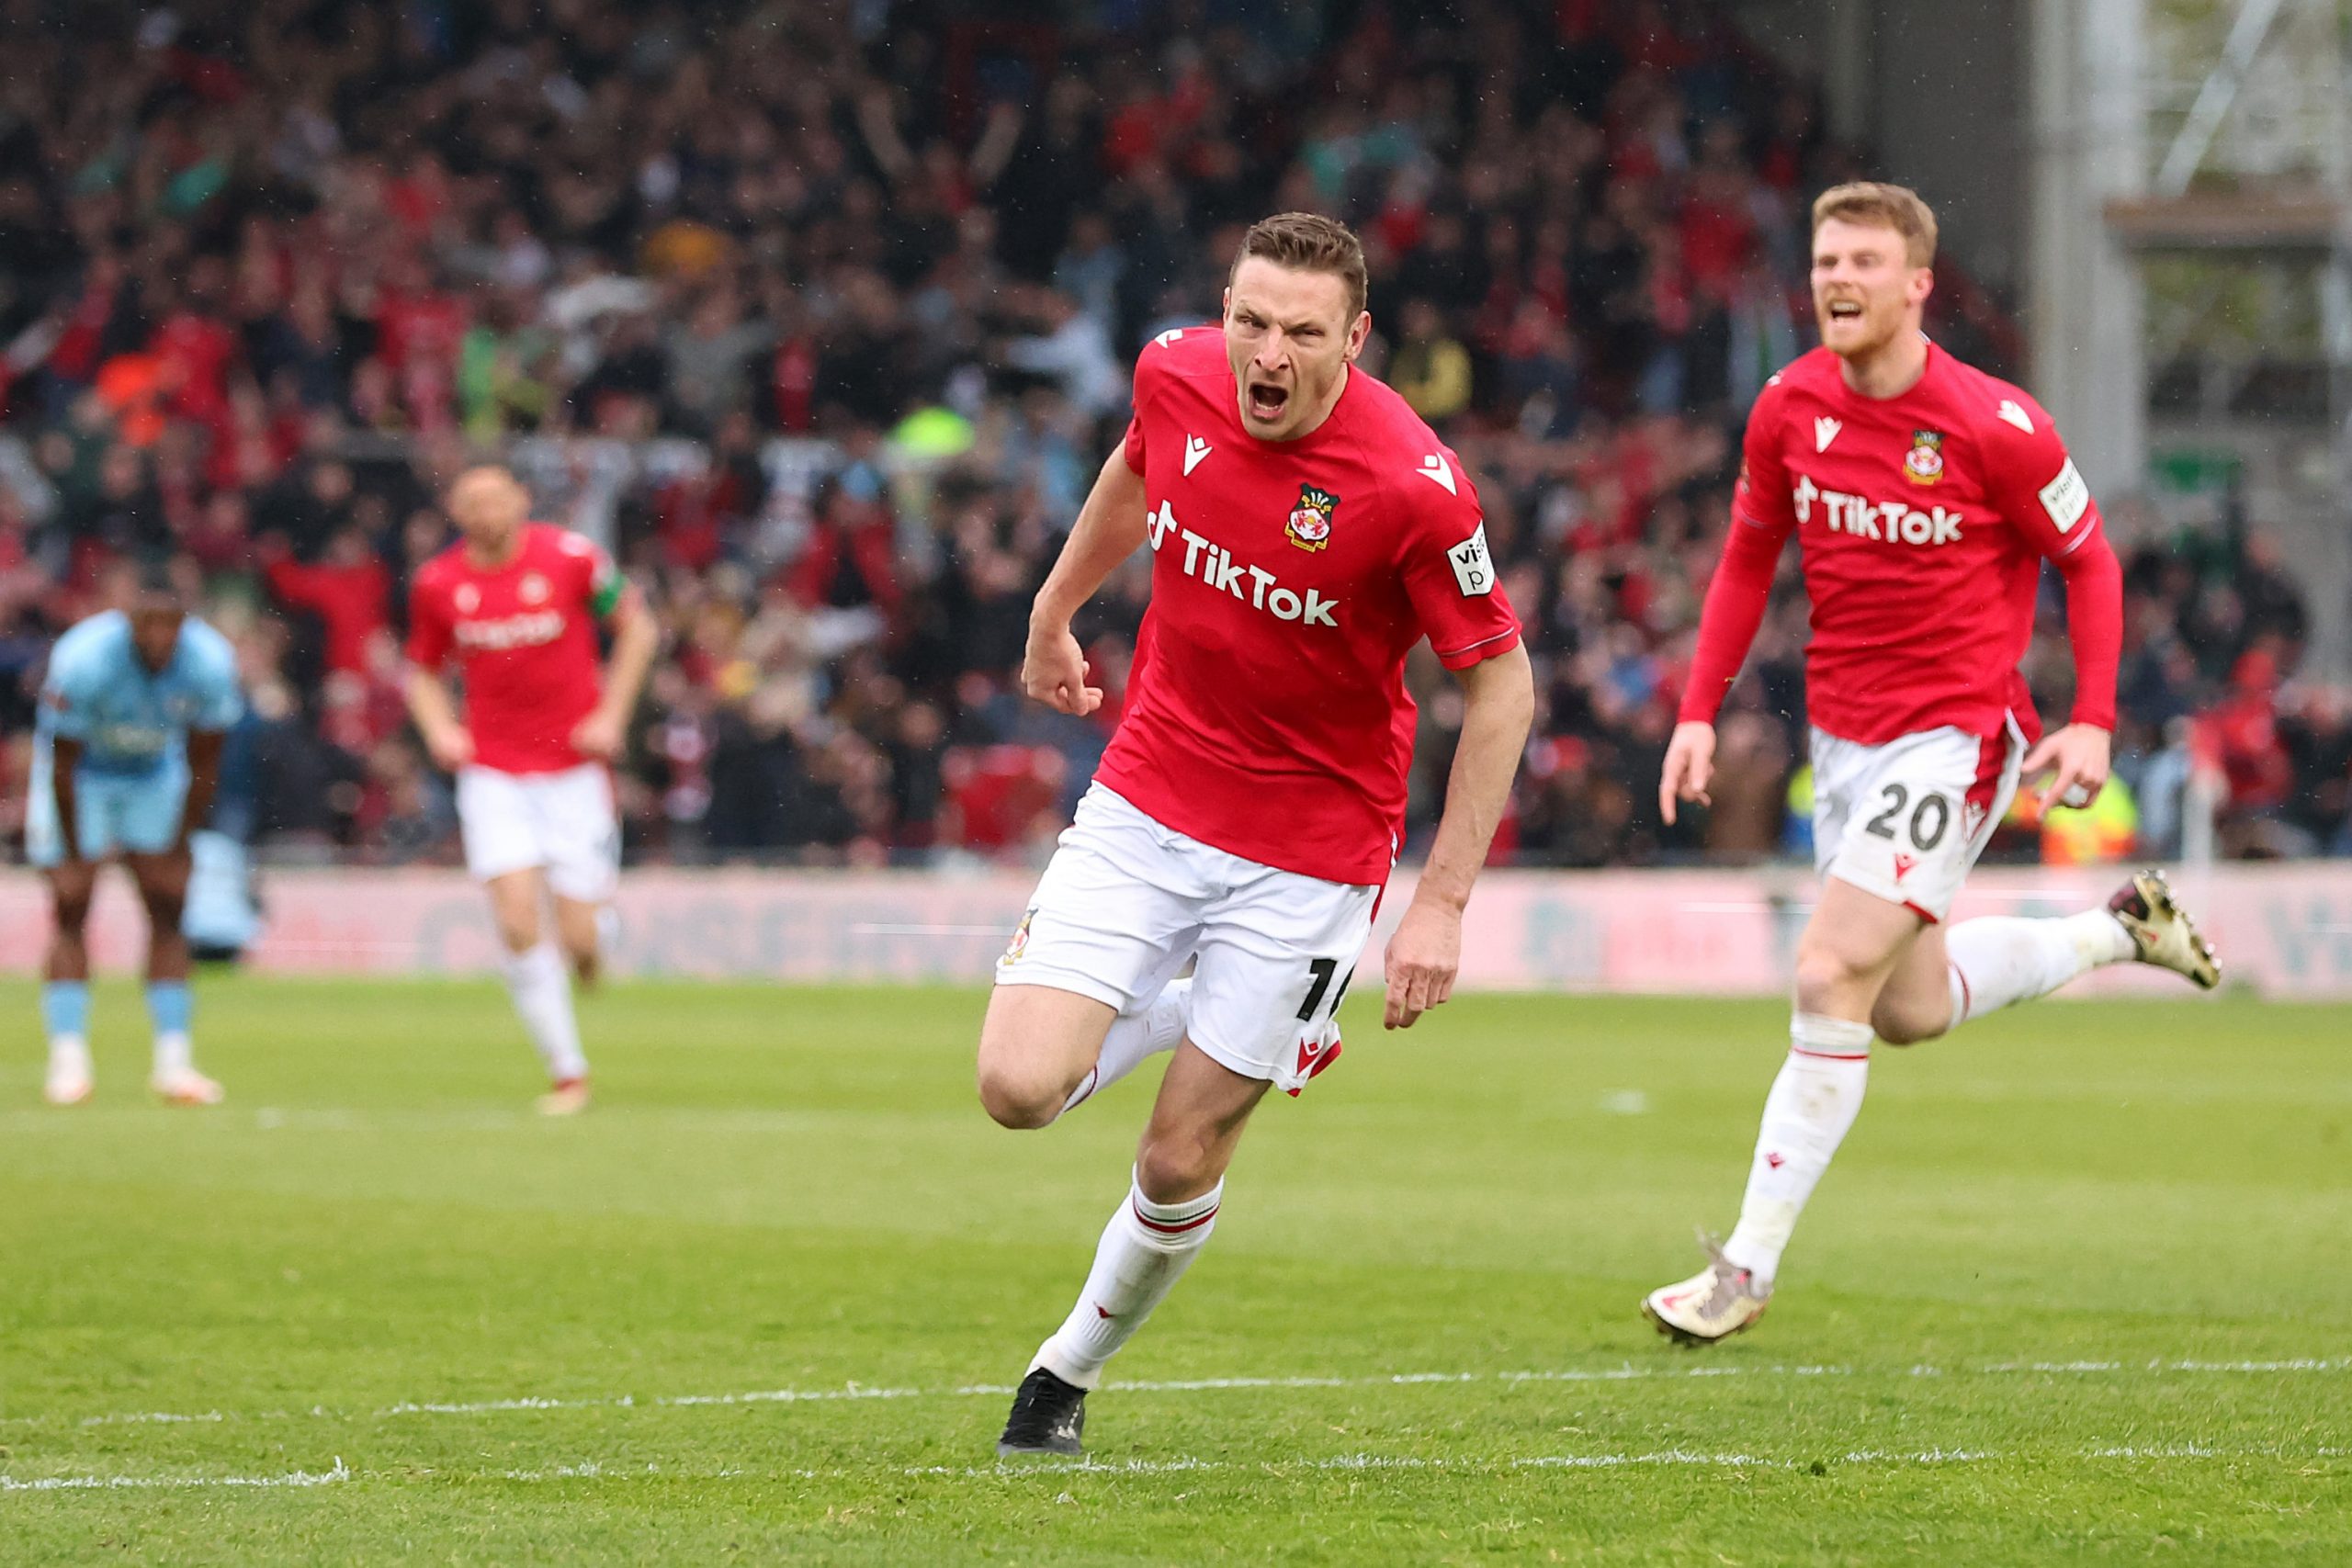 Paul Mullin of Wrexham celebrates after scoring the team's second goal during the Vanarama National League match between Wrexham and Boreham Wood at Racecourse Ground on April 22, 2023 in Wrexham, Wales. (Photo by Jan Kruger/Getty Images)